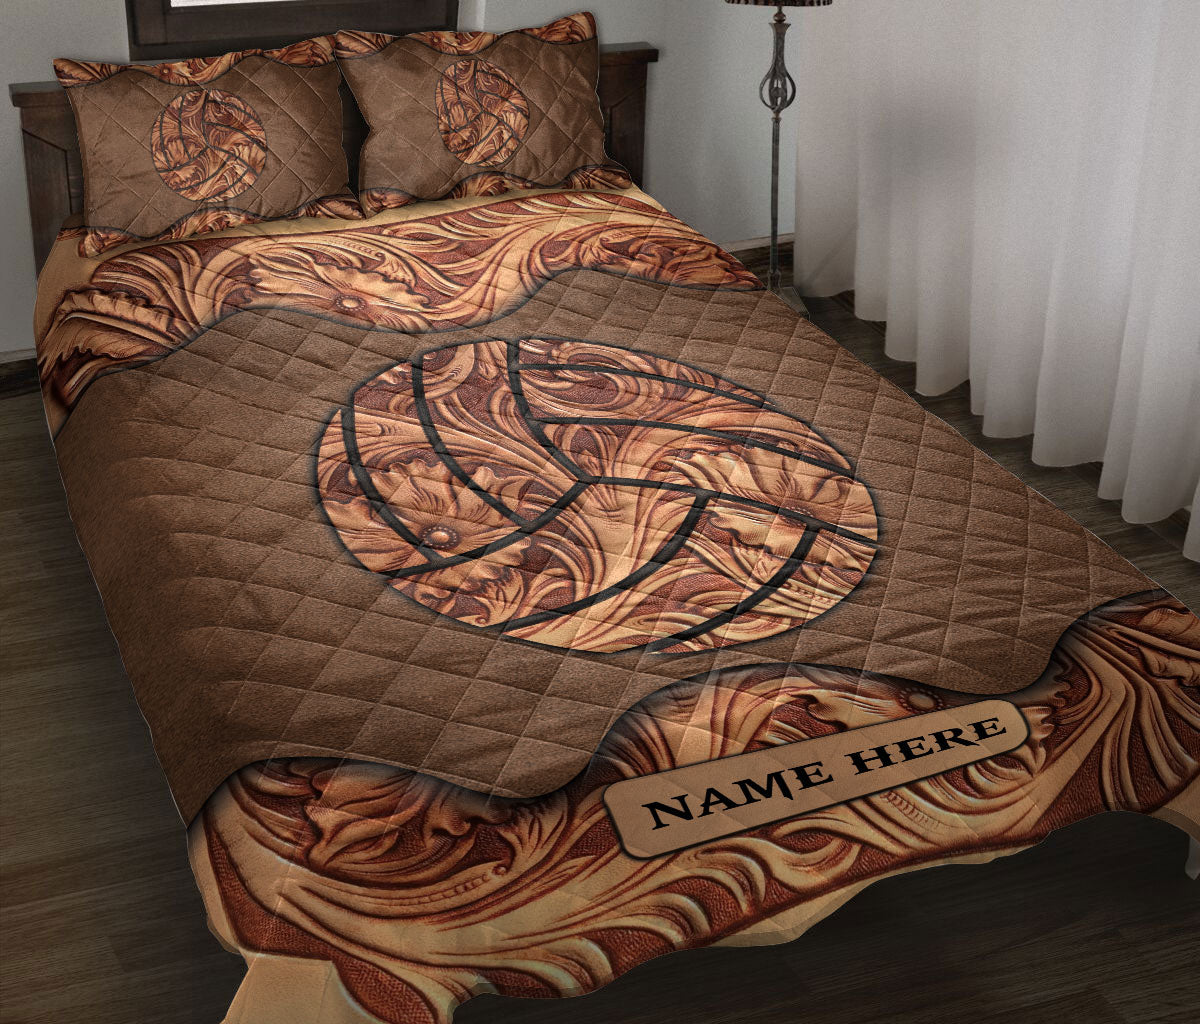 Ohaprints-Quilt-Bed-Set-Pillowcase-Wood-Volleyball-Sculpture-Unique-Gifts-Custom-Personalized-Name-Blanket-Bedspread-Bedding-3430-Throw (55'' x 60'')